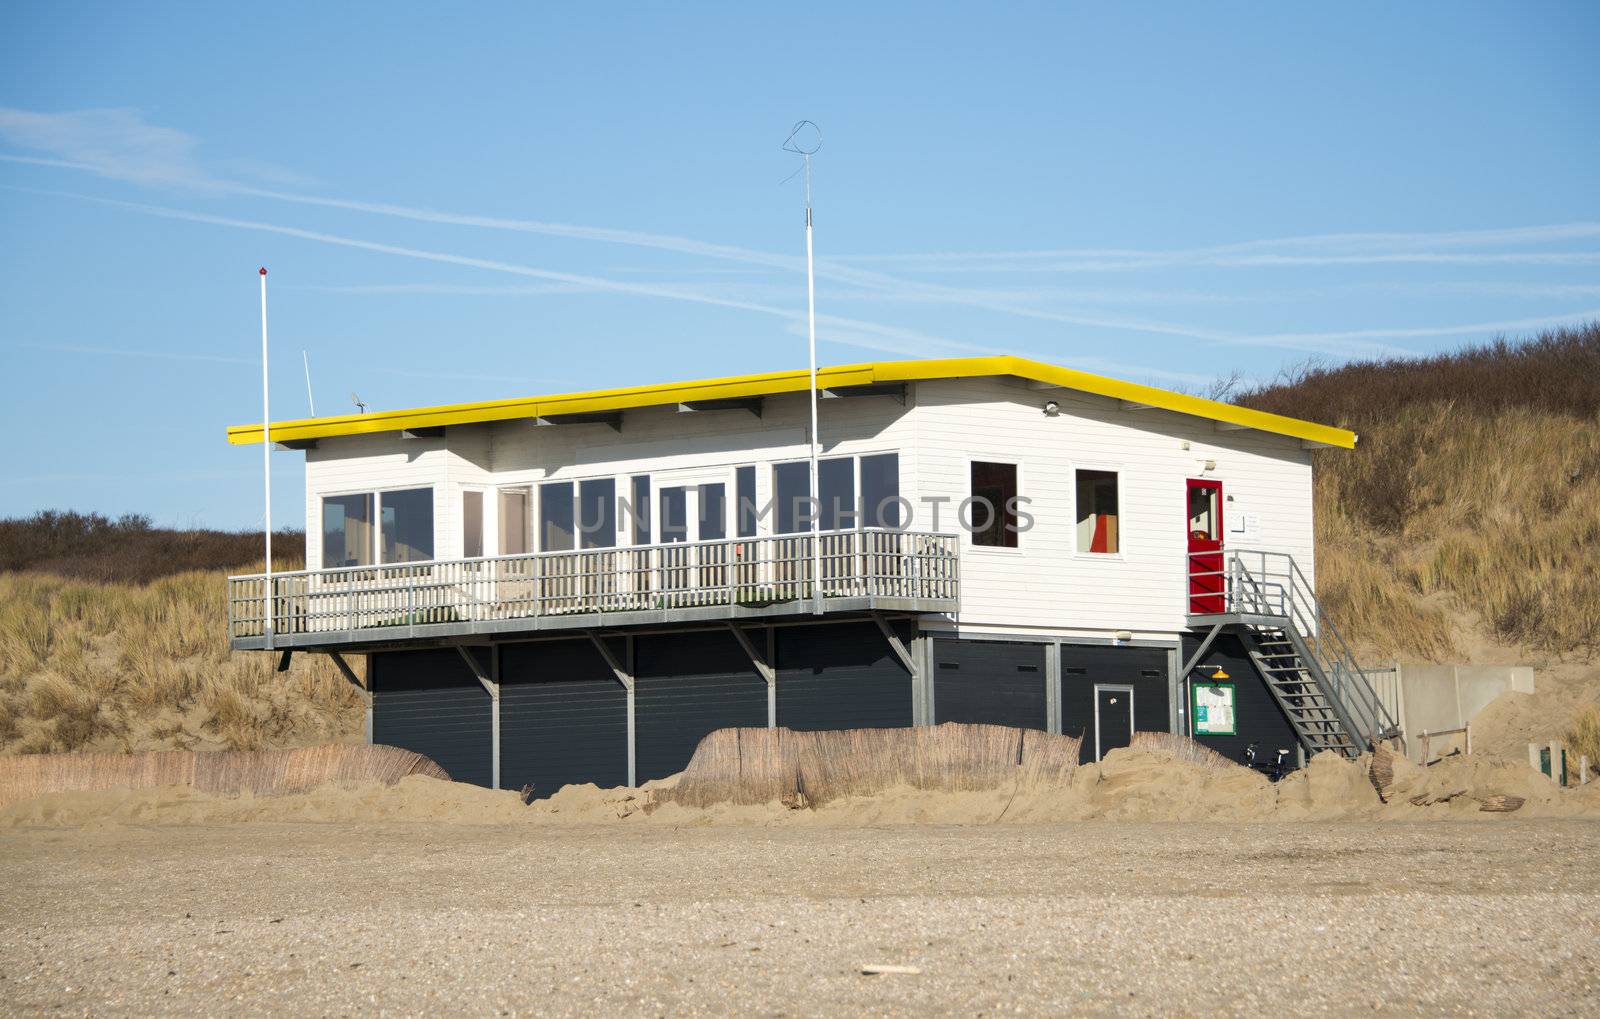 life guard building in Holland by compuinfoto